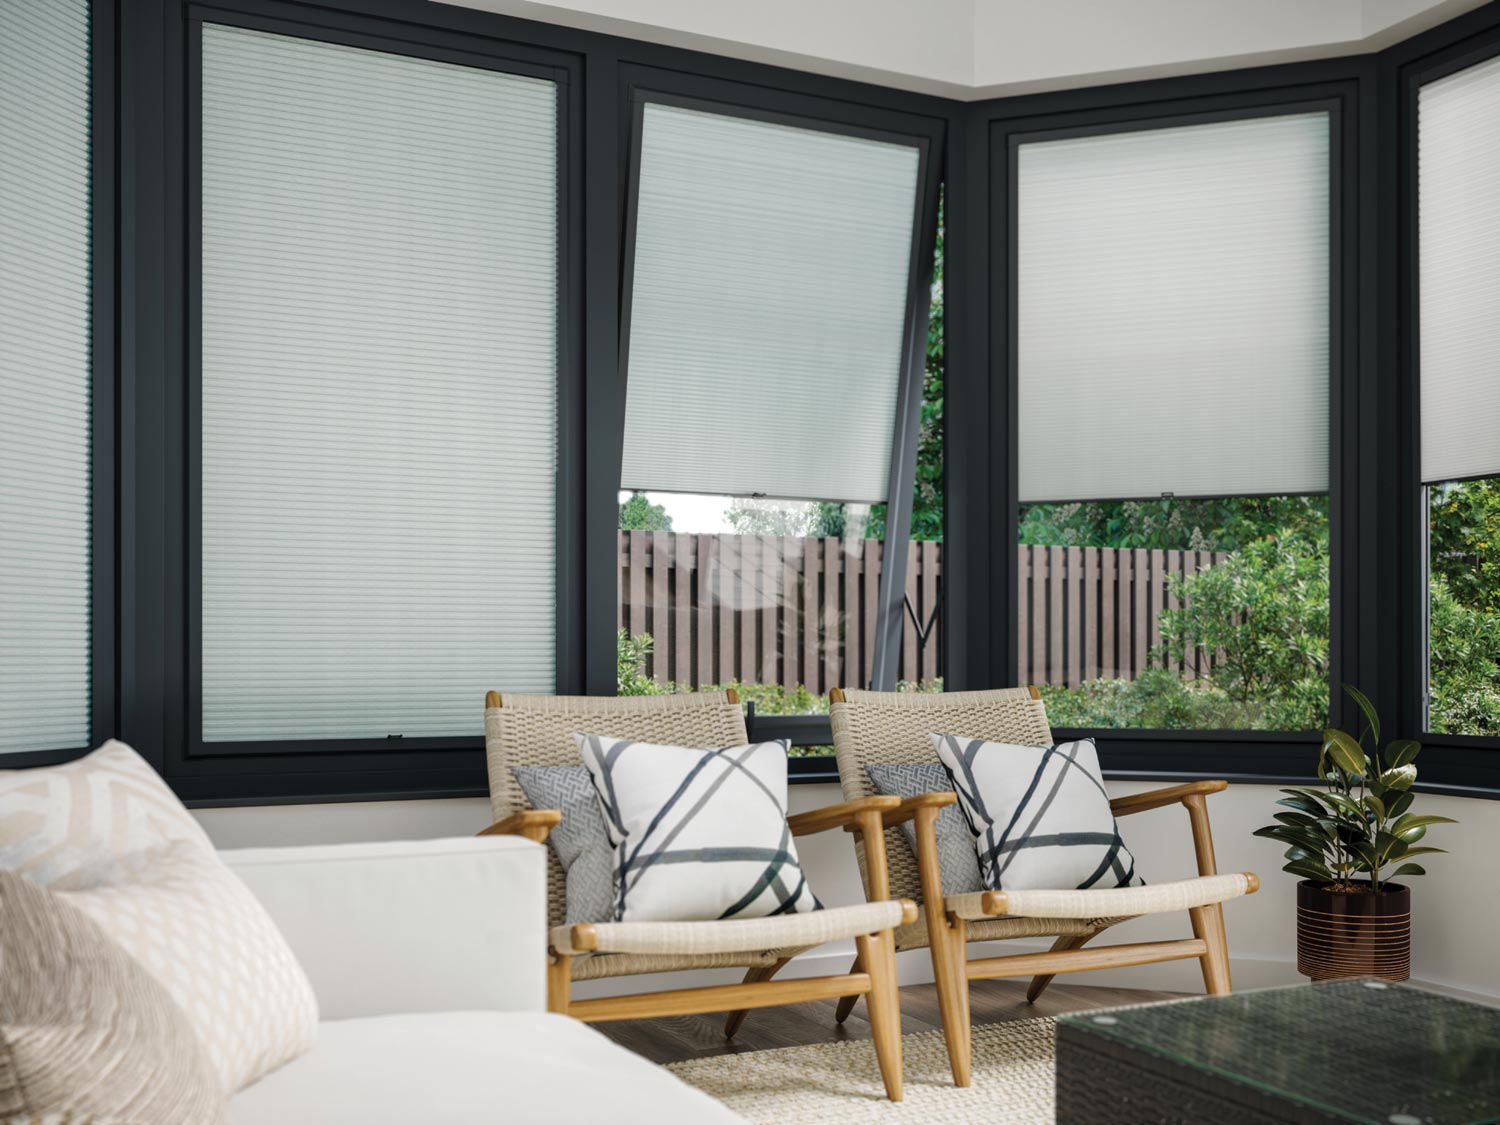 								 								 								 								 								Conservatory Blinds Glasgow										